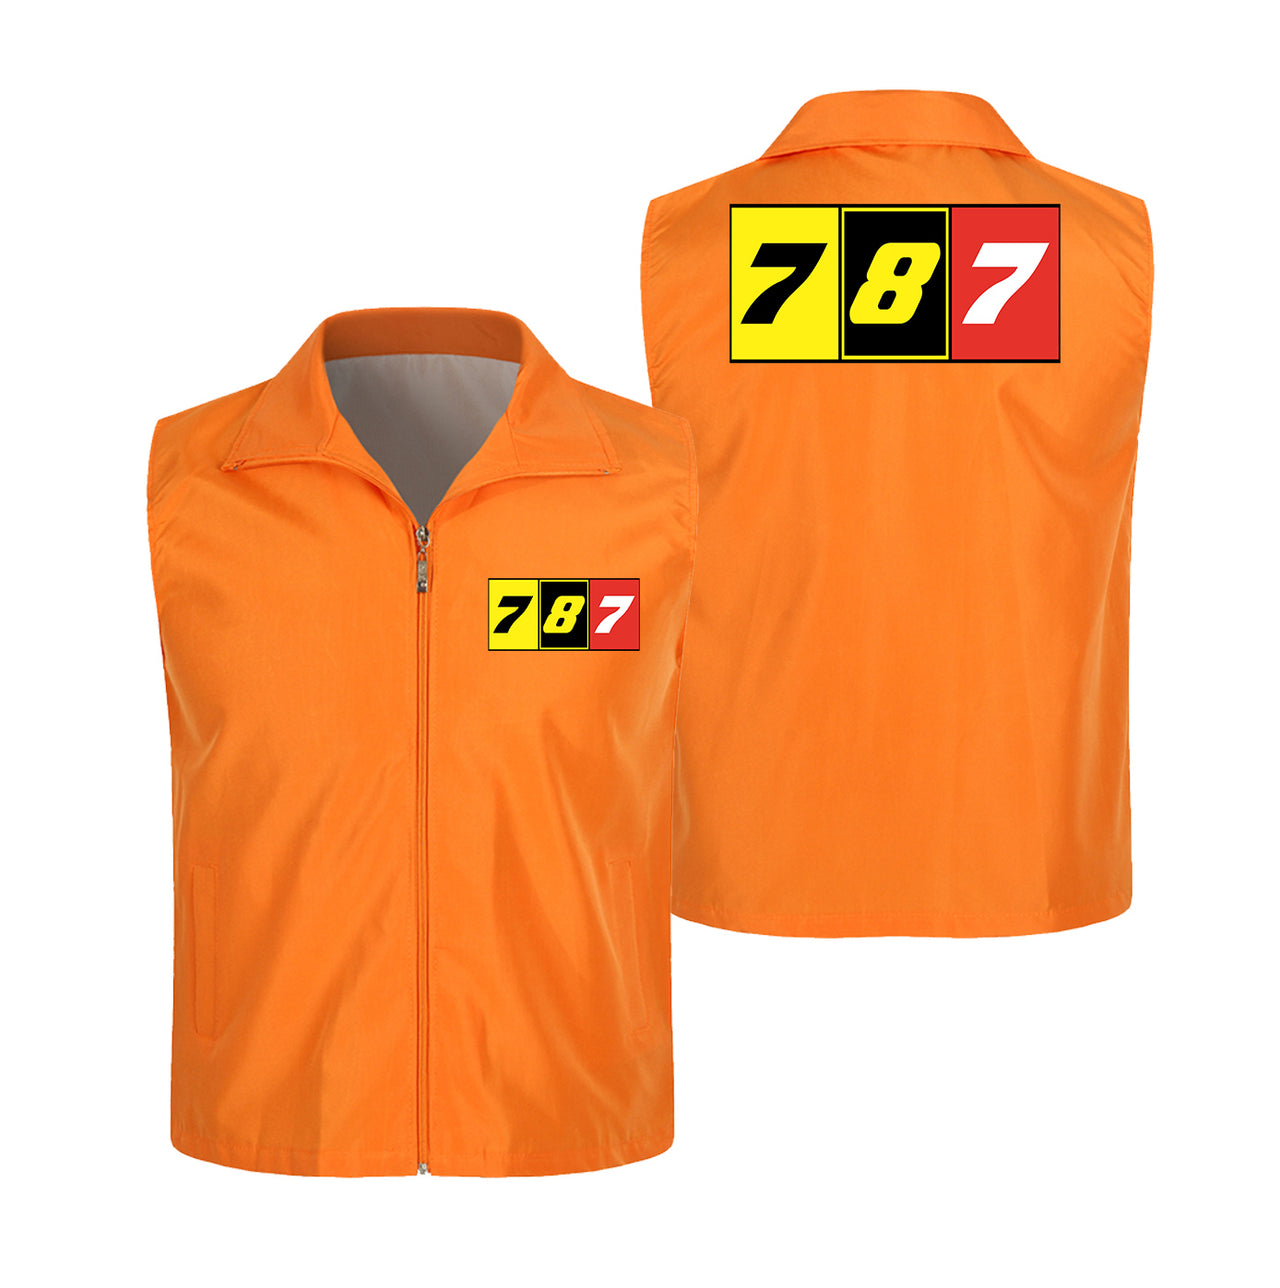 Flat Colourful 787 Designed Thin Style Vests